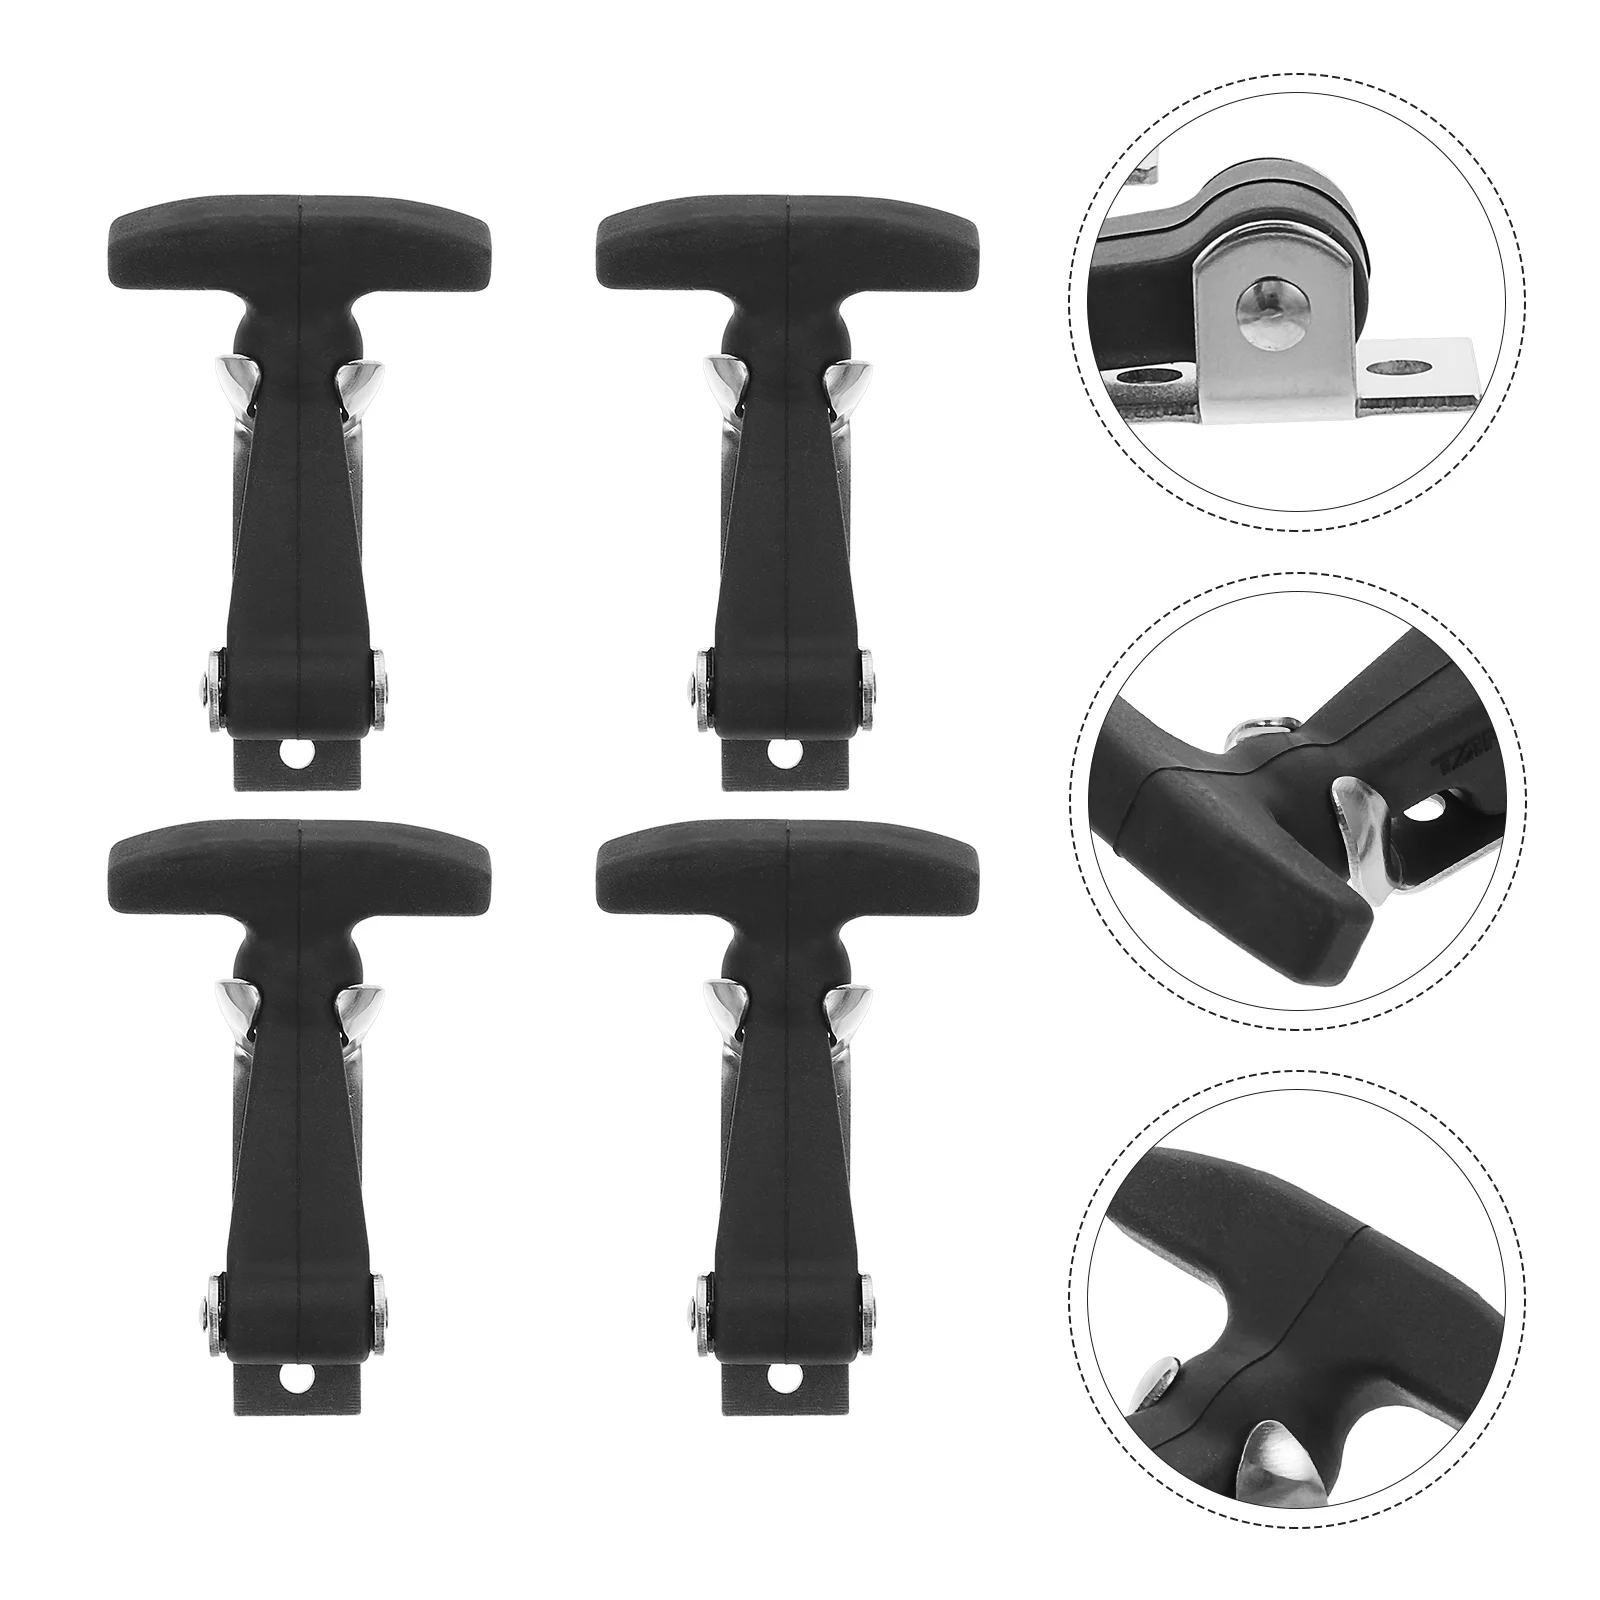 

4pcs Stainless Steel Rubber Shockproof Hood Catches T-handle Hasps (Black)